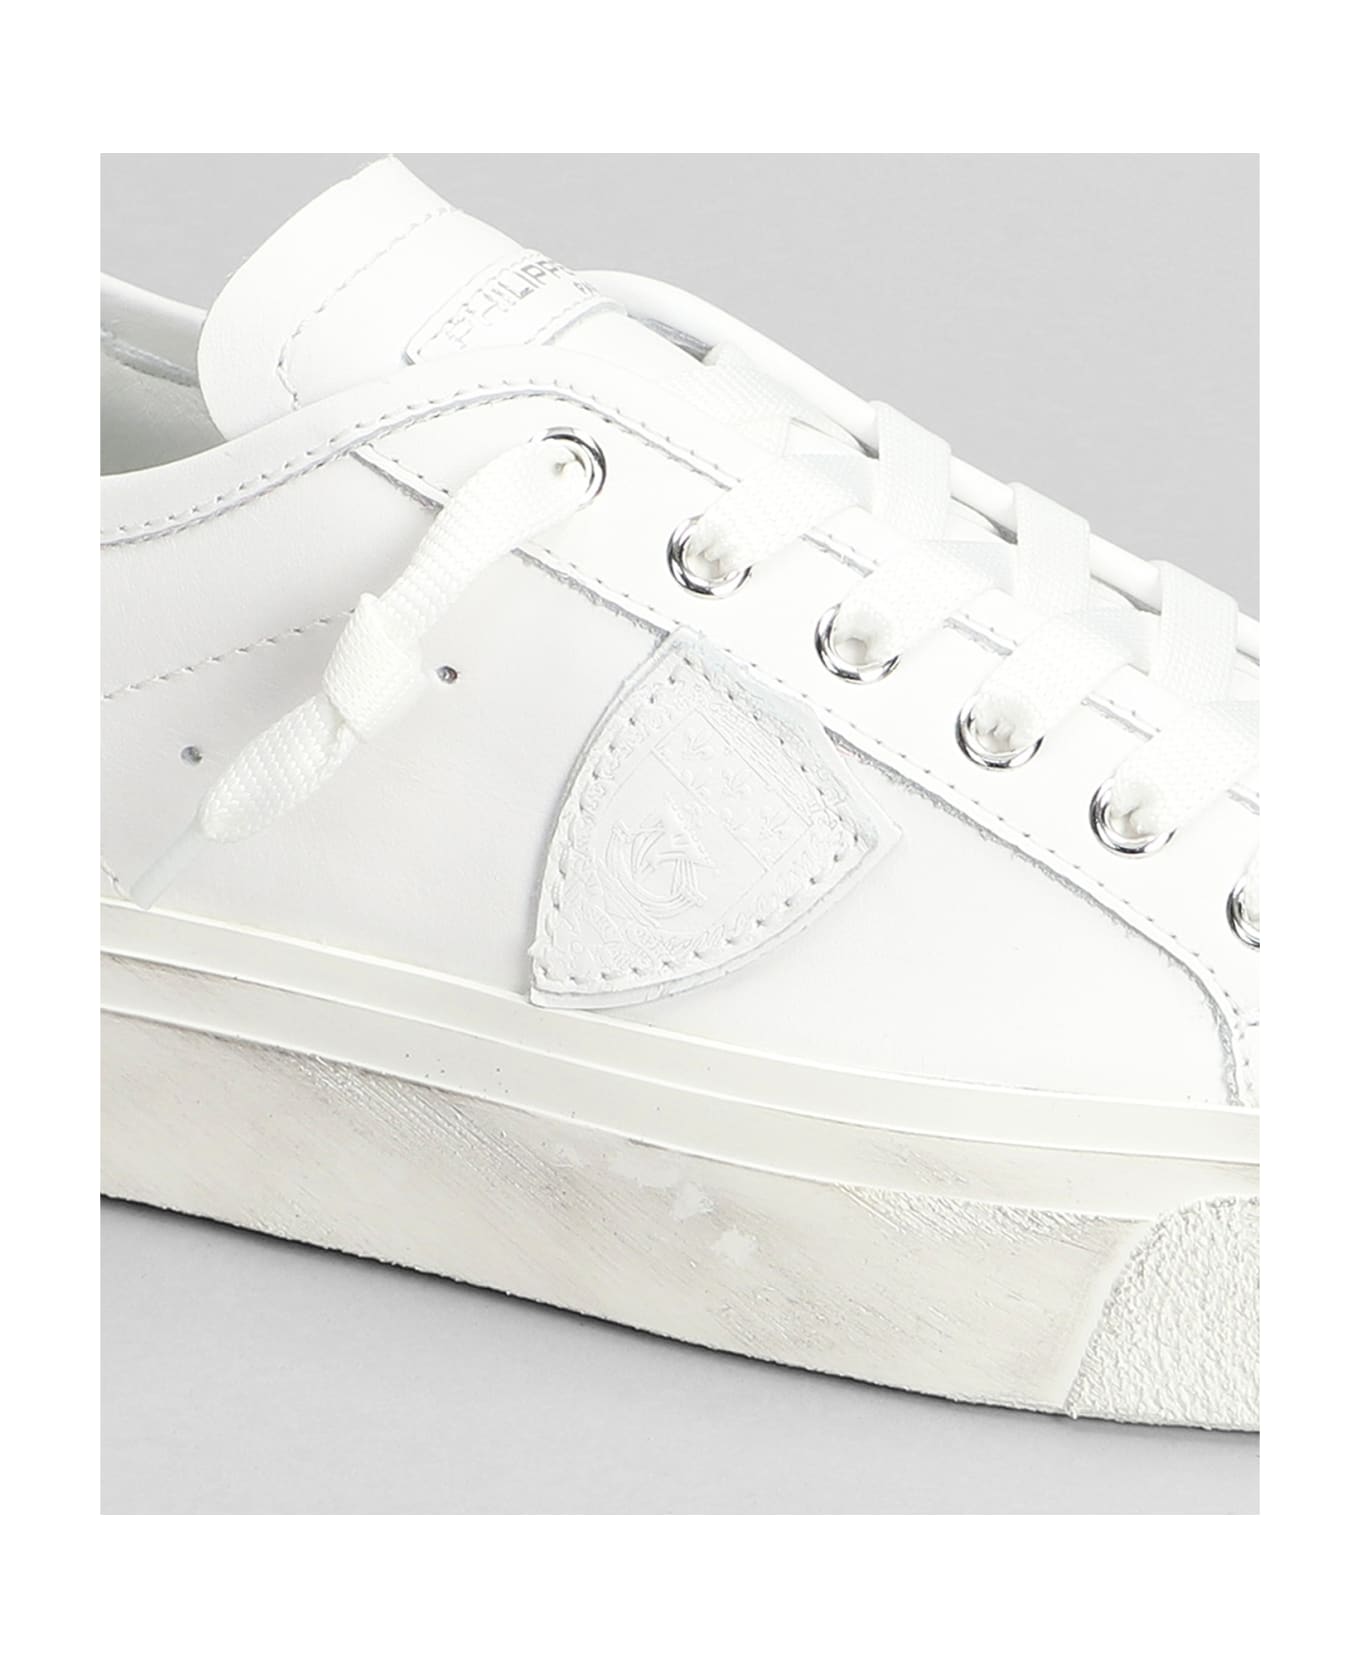 Philippe Model Paris Haute Low Sneakers In White Leather - white